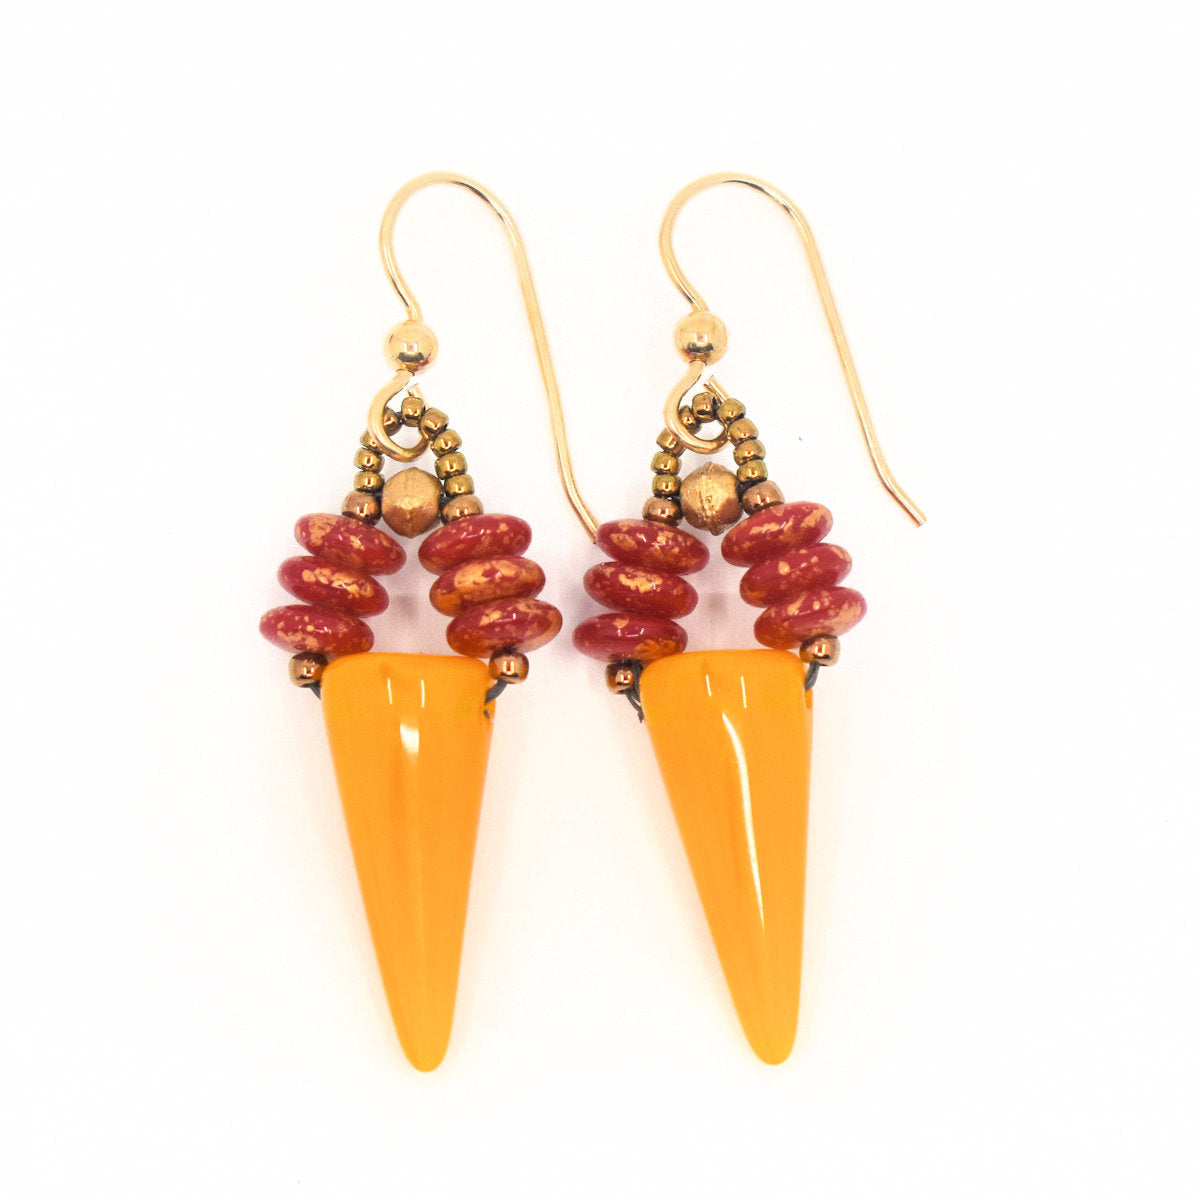 Earrings formed from warm yellow upside down cones  suspended from two parallel stacks of red discs on top lay on a white background.